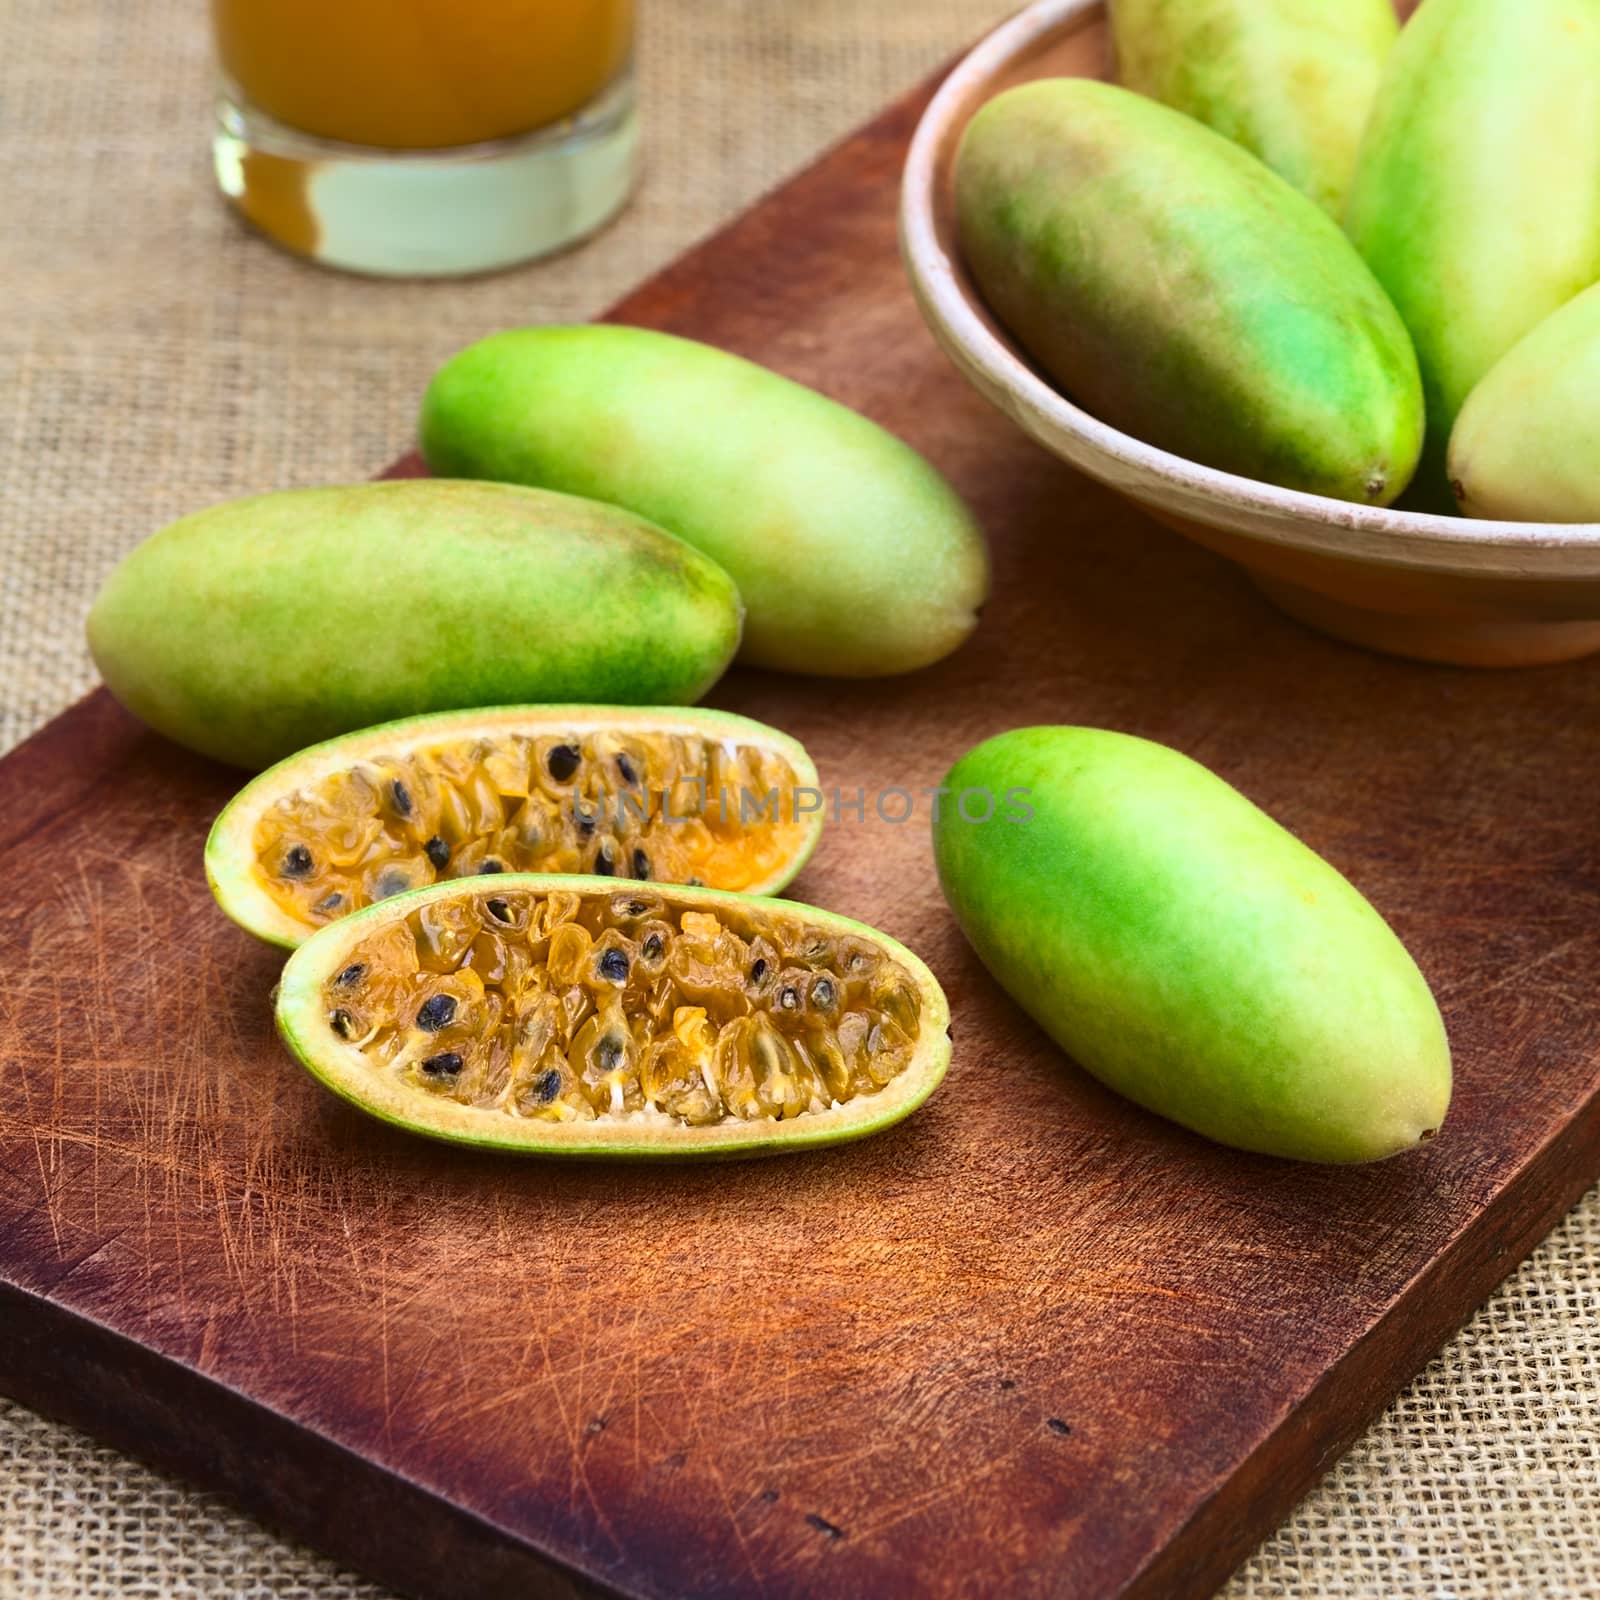 Latin American fruit called banana passionfruit (lat. Passiflora tripartita) (in Spanish mostly tumbo, curuba, taxo) cut in half which is mainly used to prepare juice (Selective Focus, Focus on the fruits in the front)